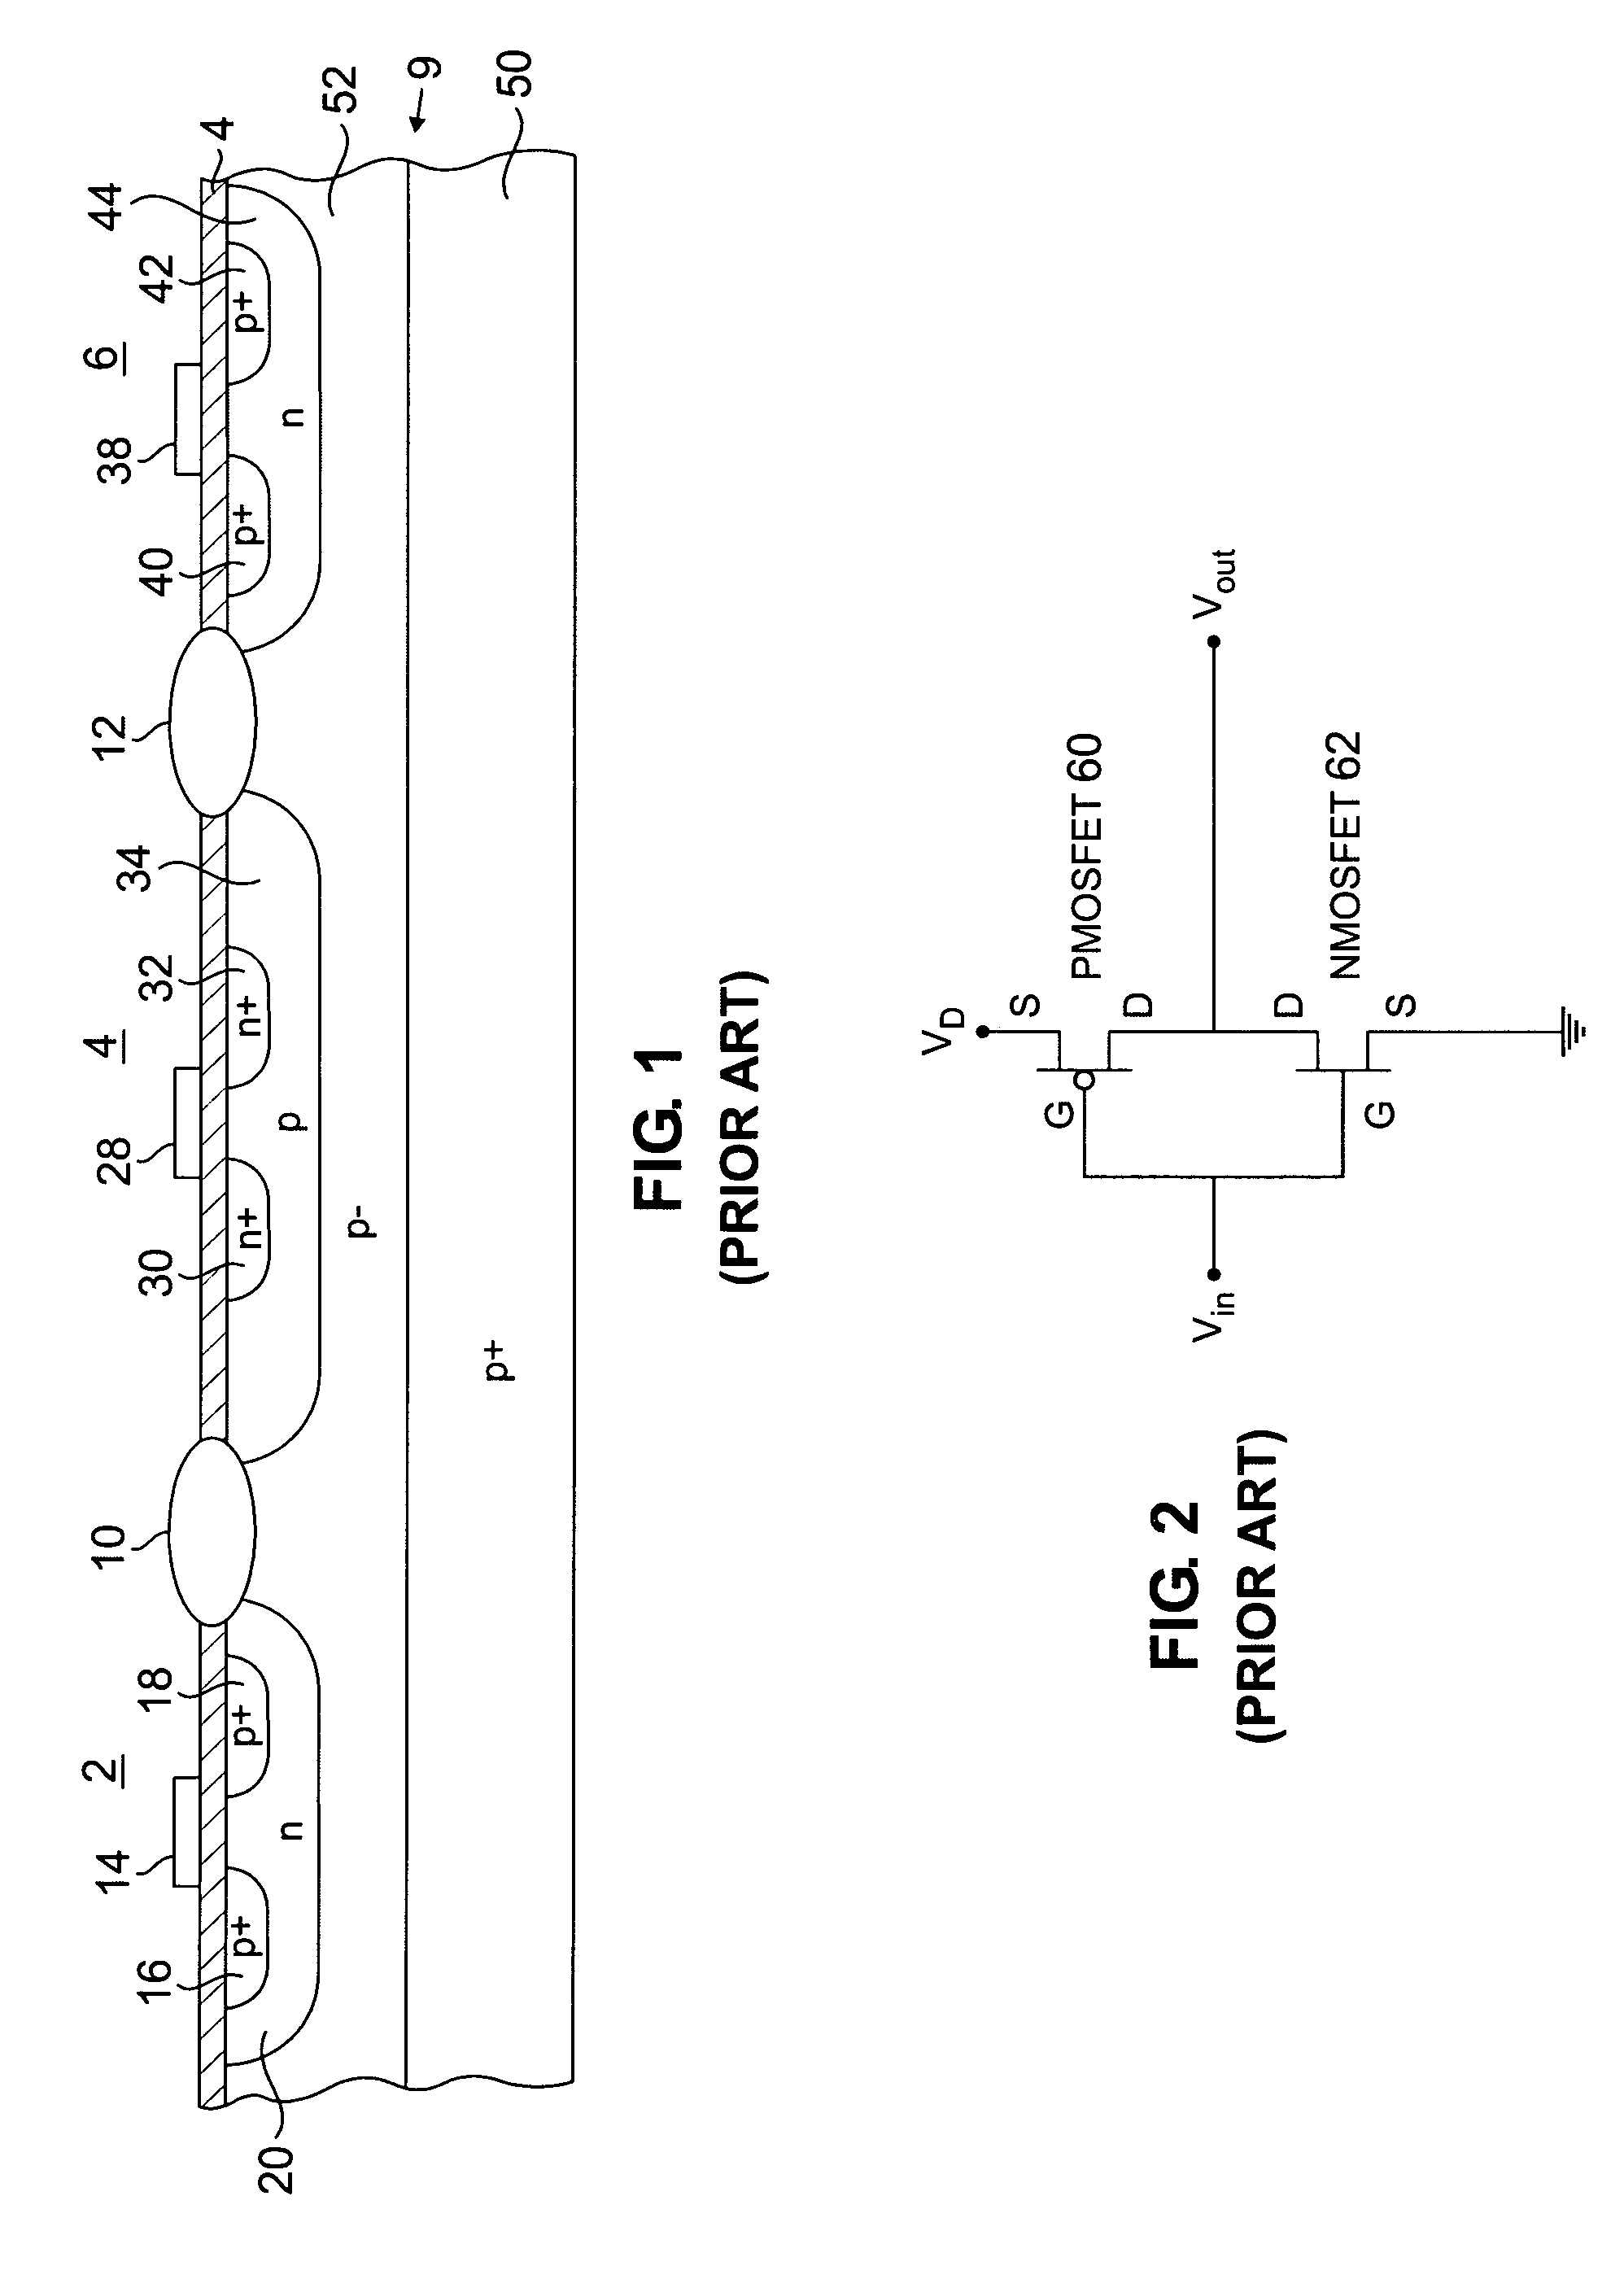 Method of ion implantation for achieving desired dopant concentration